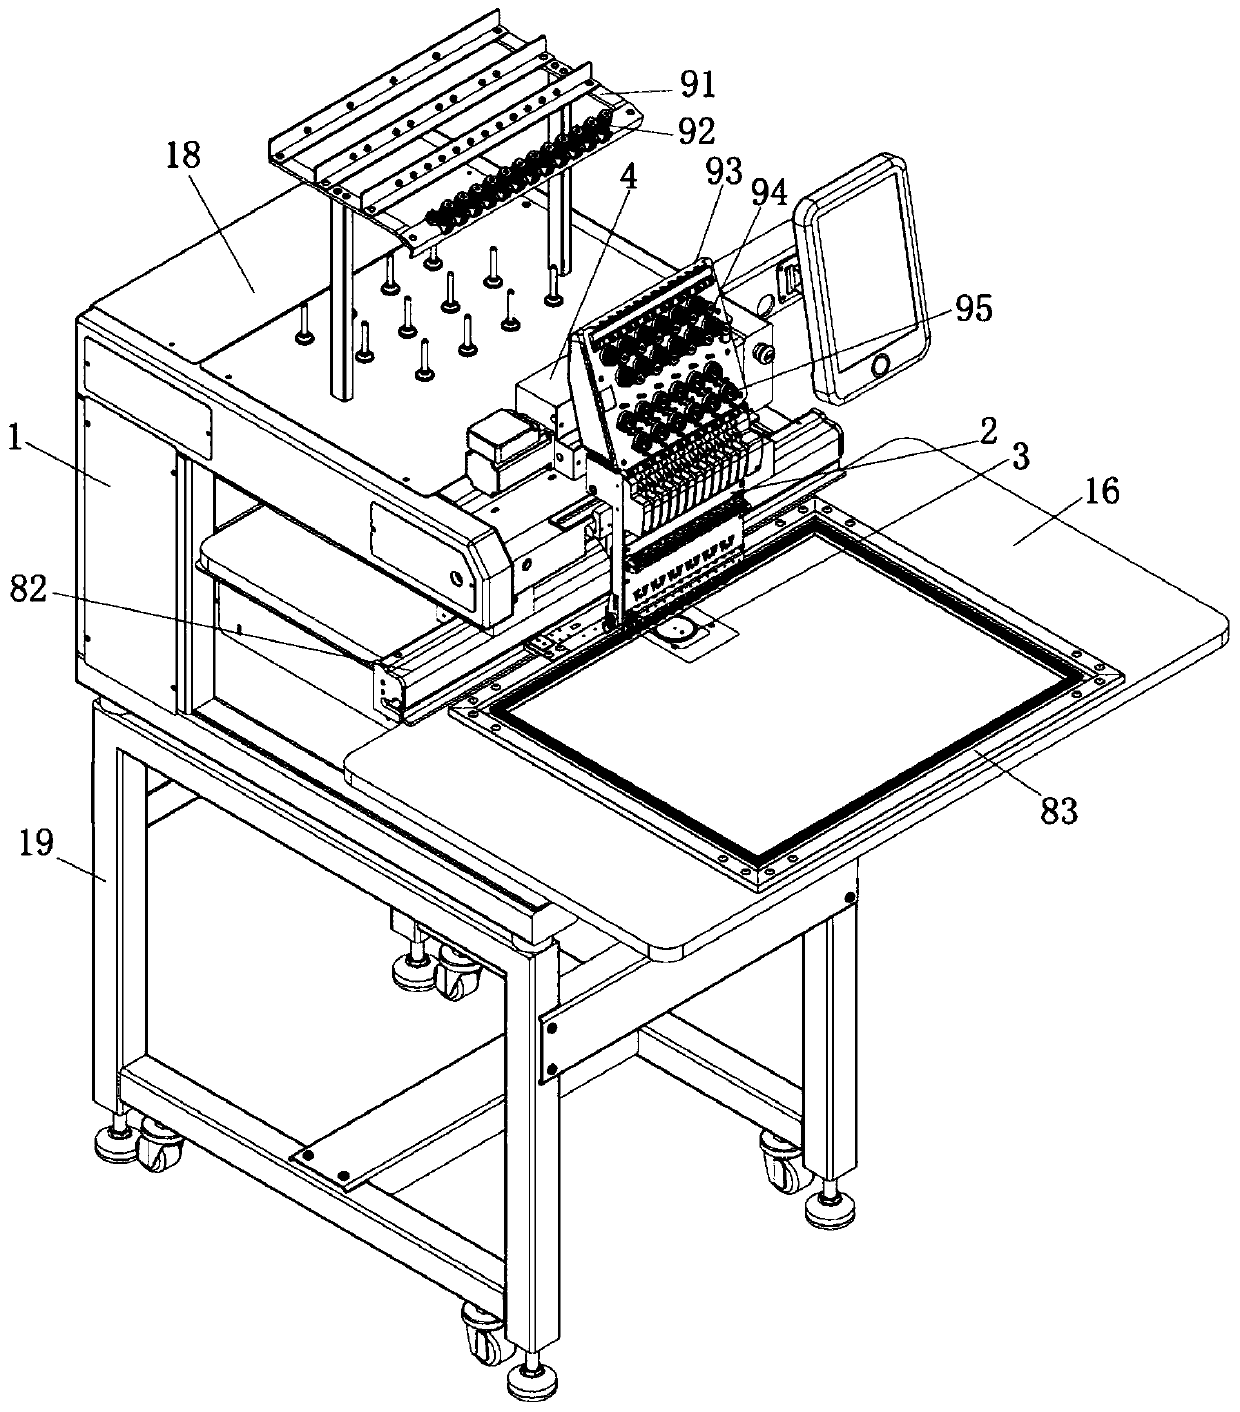 Single-head plain embroidery machine of light structure